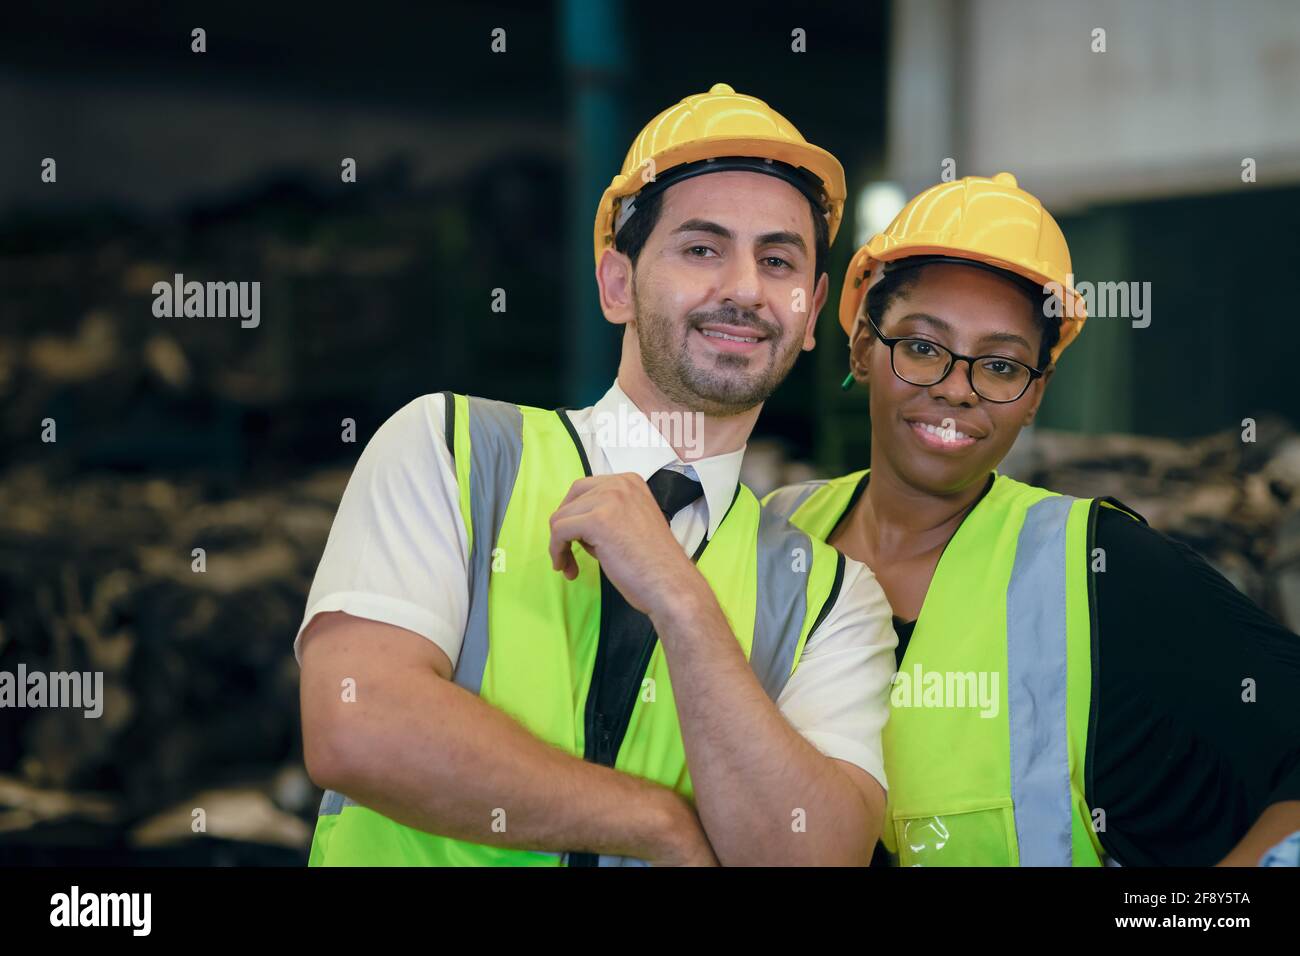 Couple friend Team Worker mix race  enjoy working in heavy factory standing together happy smiling portrait shot looking camera Stock Photo